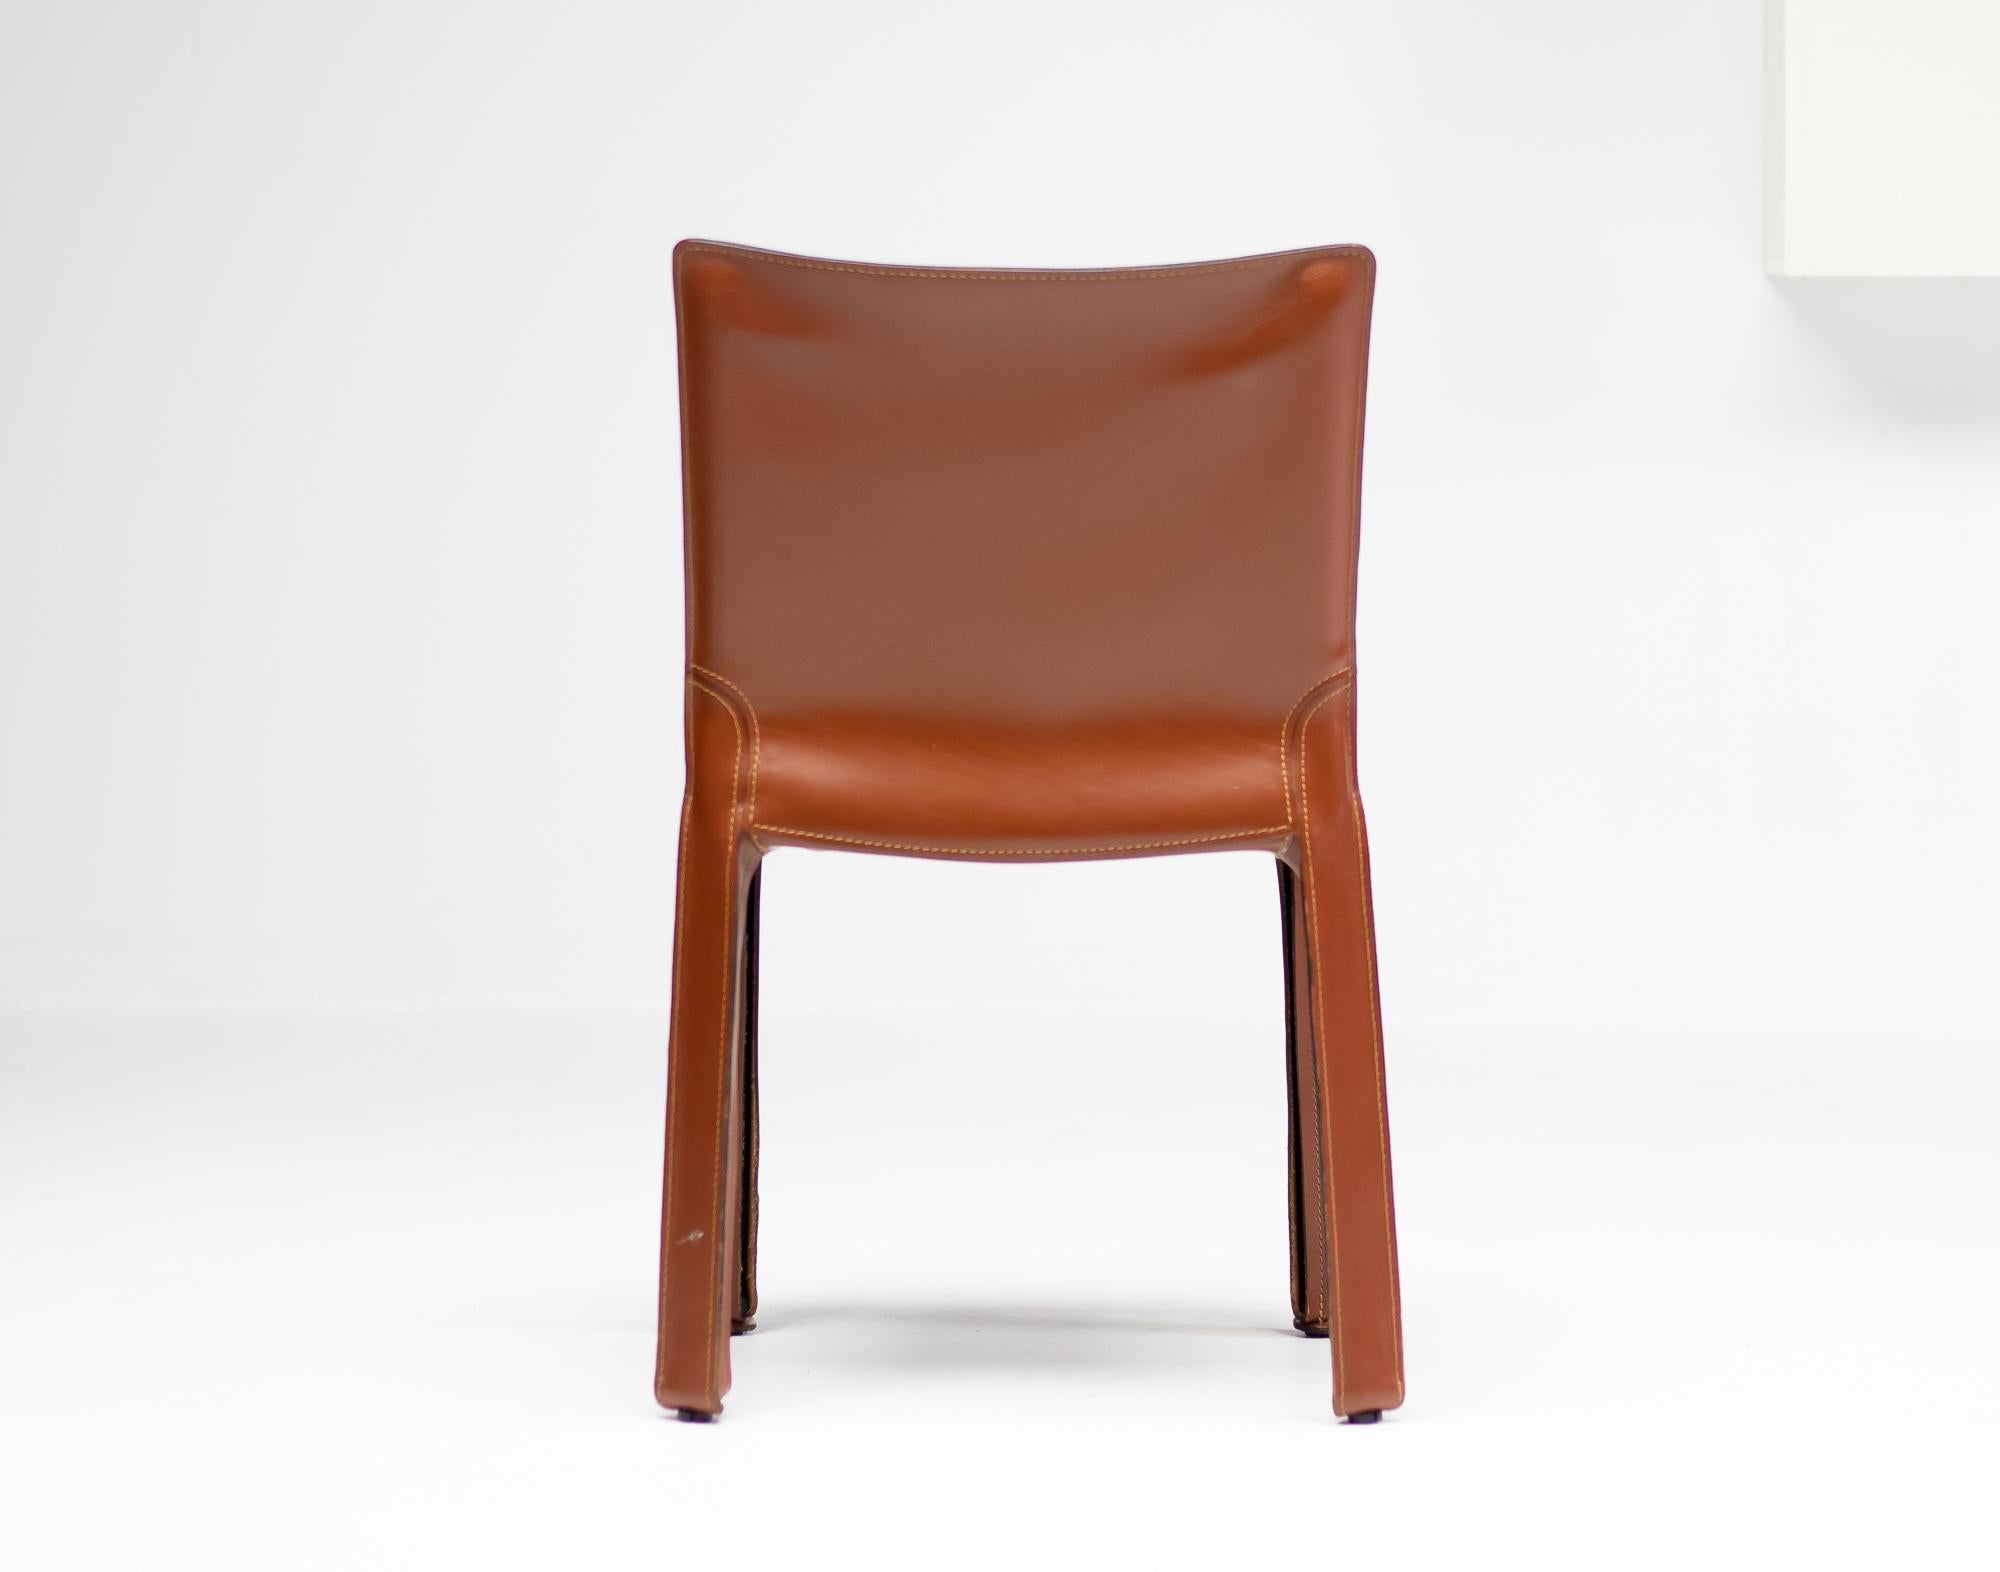 Set of Six Mario Bellini Cab Chairs for Cassina in Cognac Saddle Leather 1